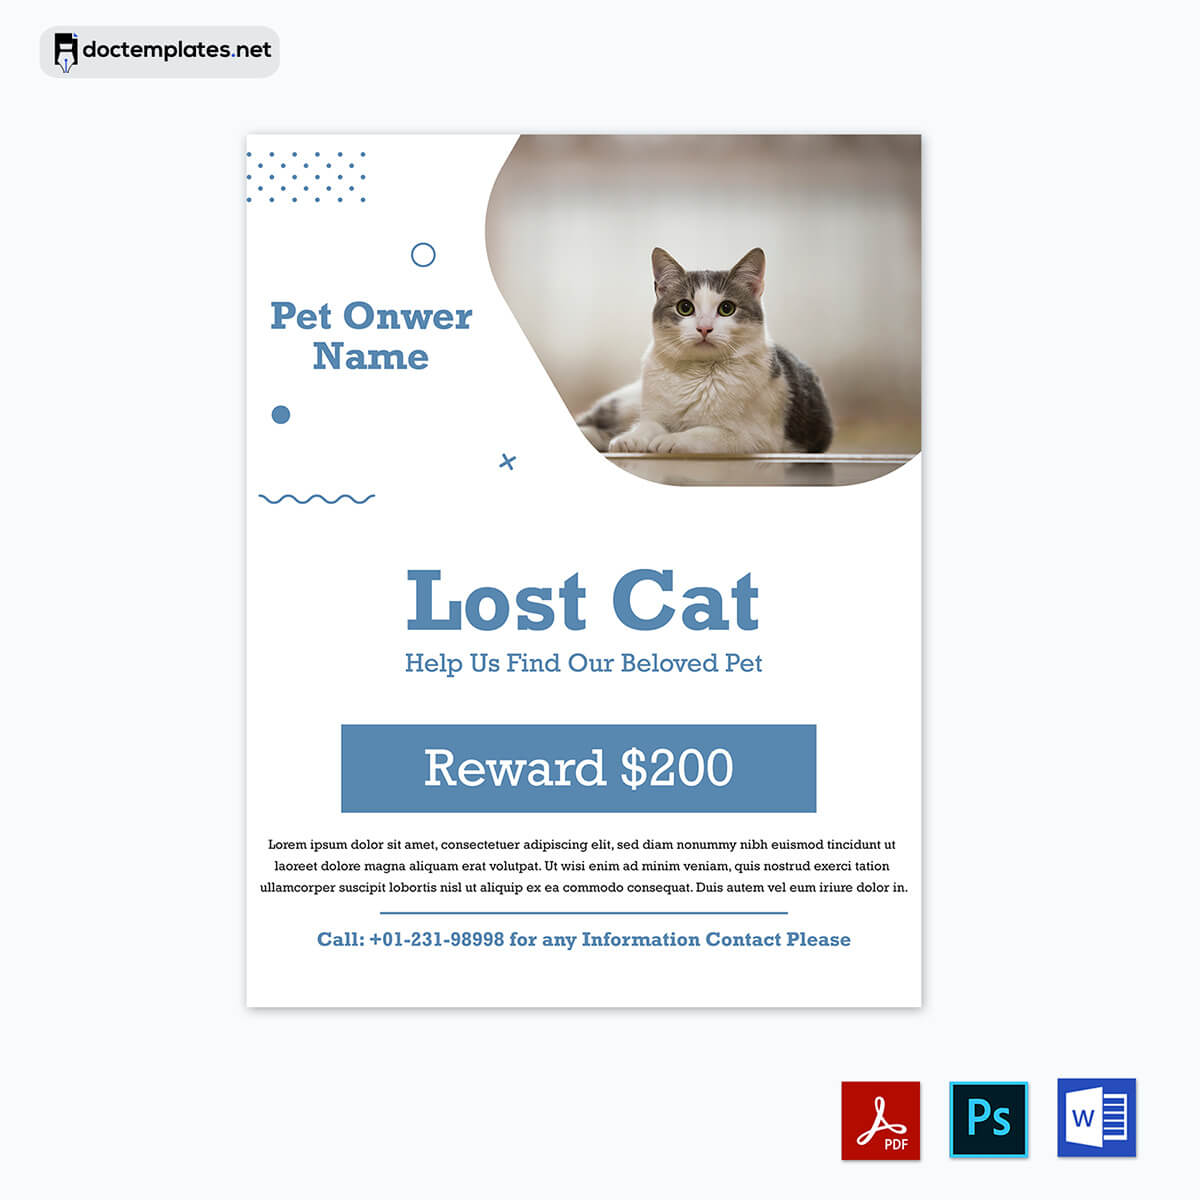 "Missing Pet Flyer Template" - Utilize this template to craft a persuasive flyer for locating lost cats and dogs.